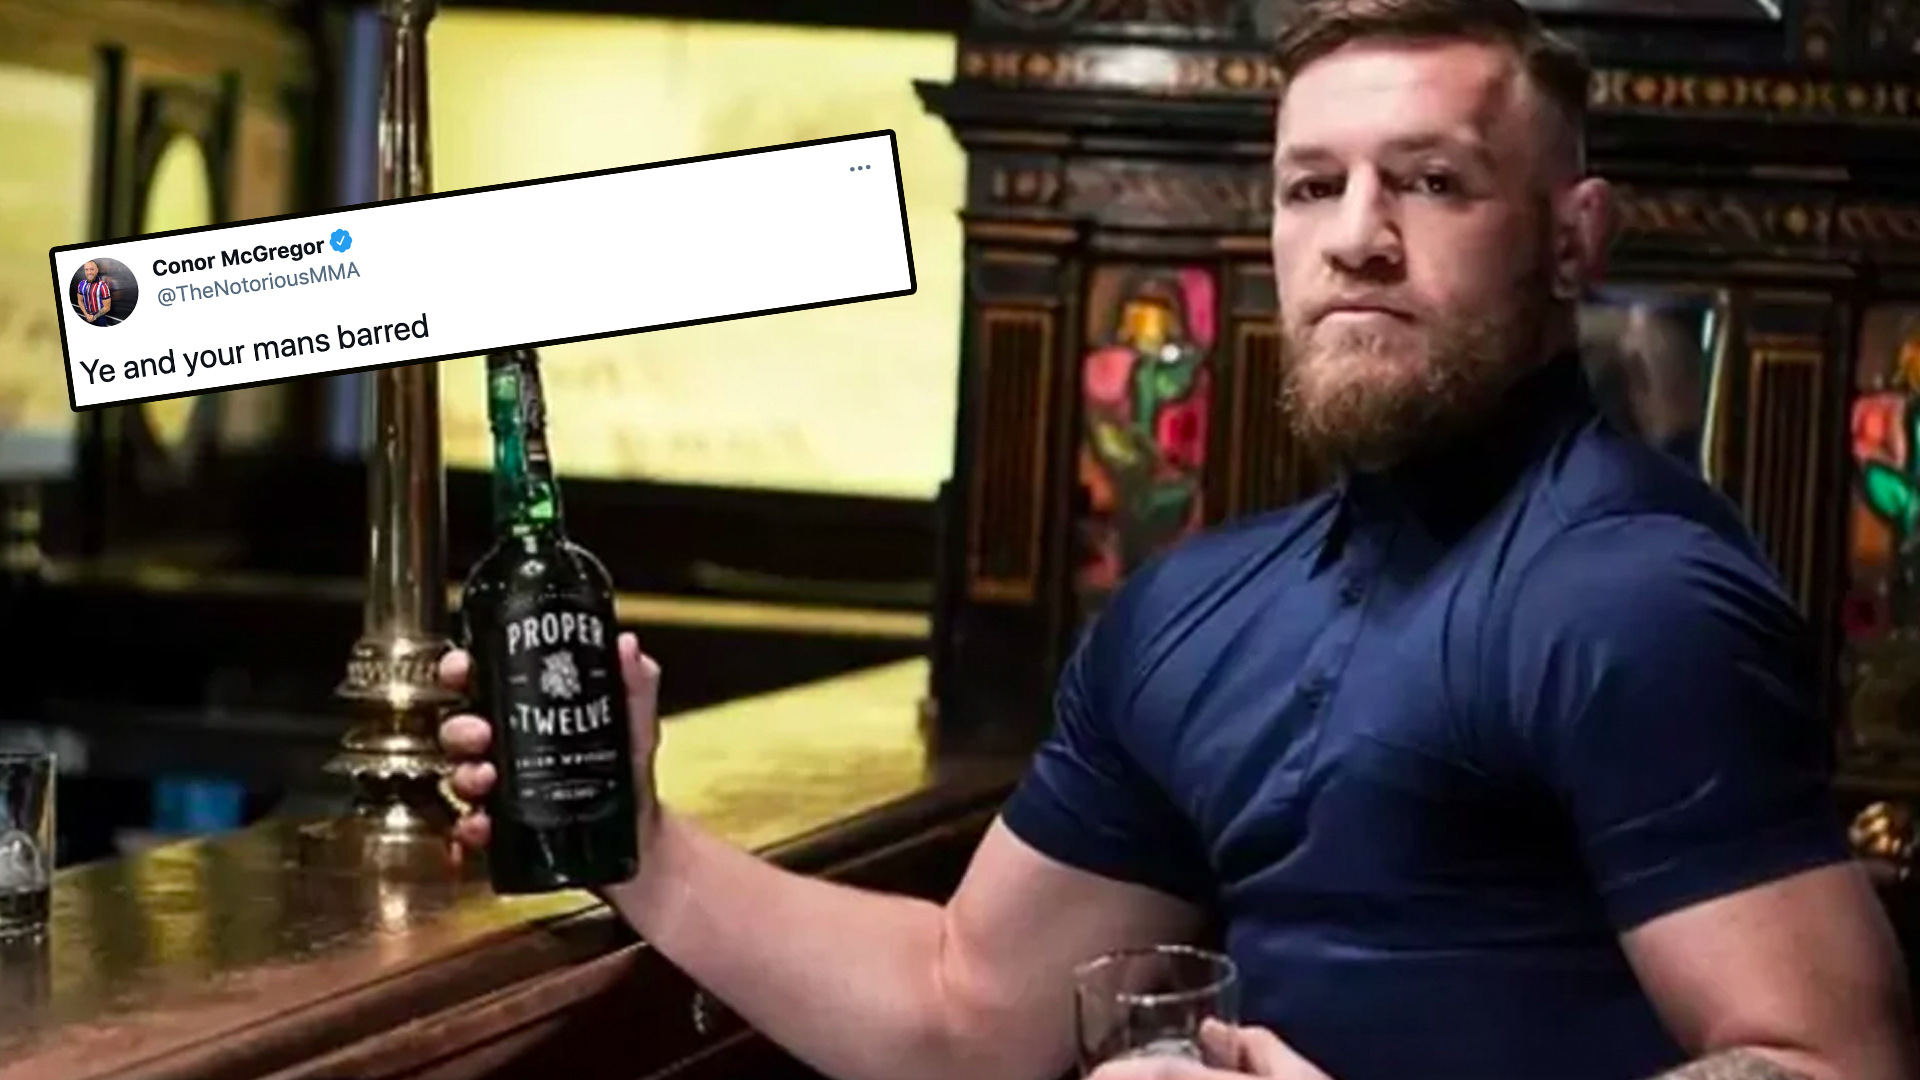 Conor McGregor buys pub where he punched elderly man and bars him